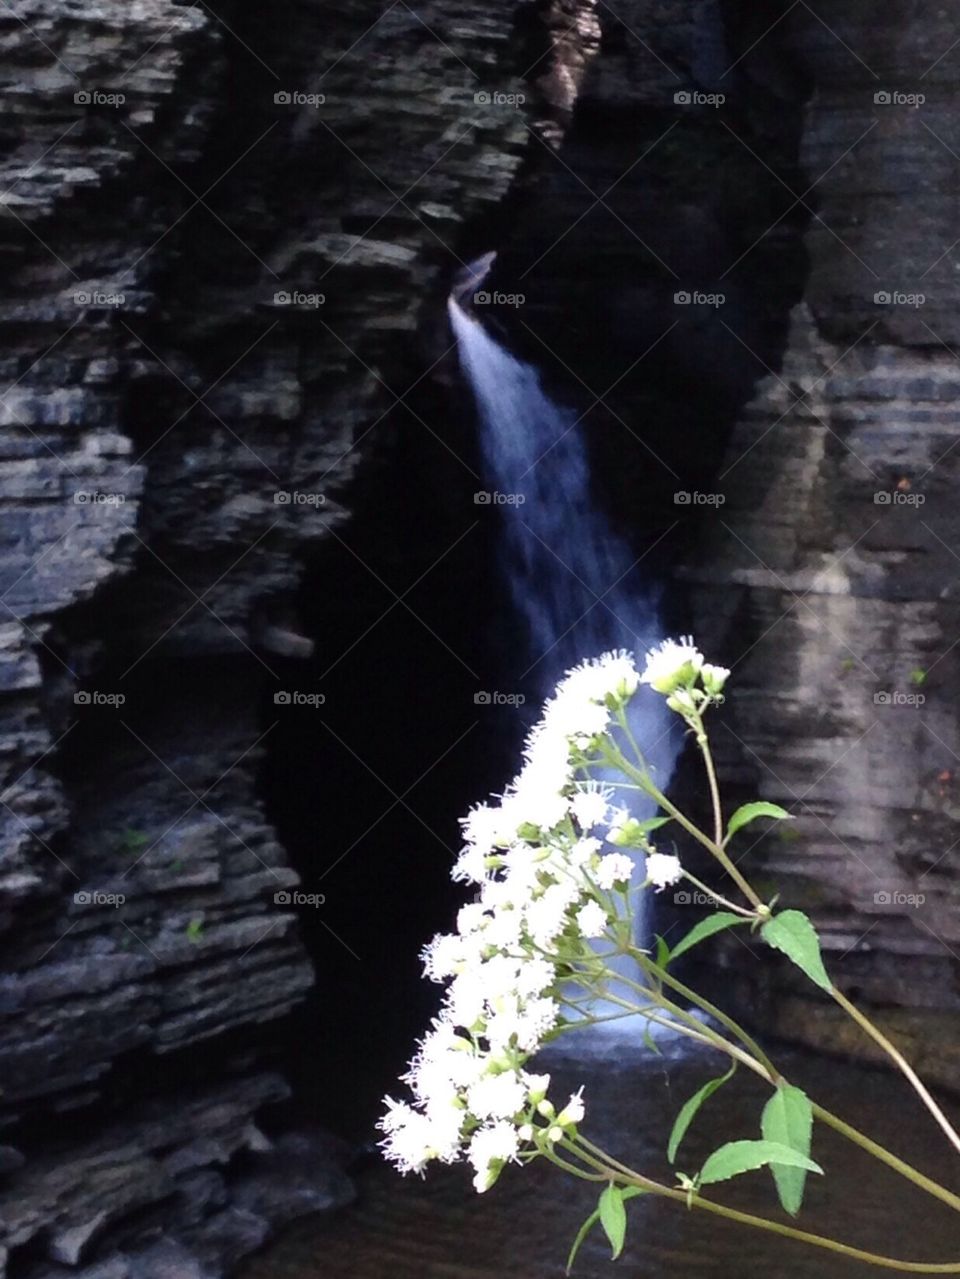 Flowers and falls